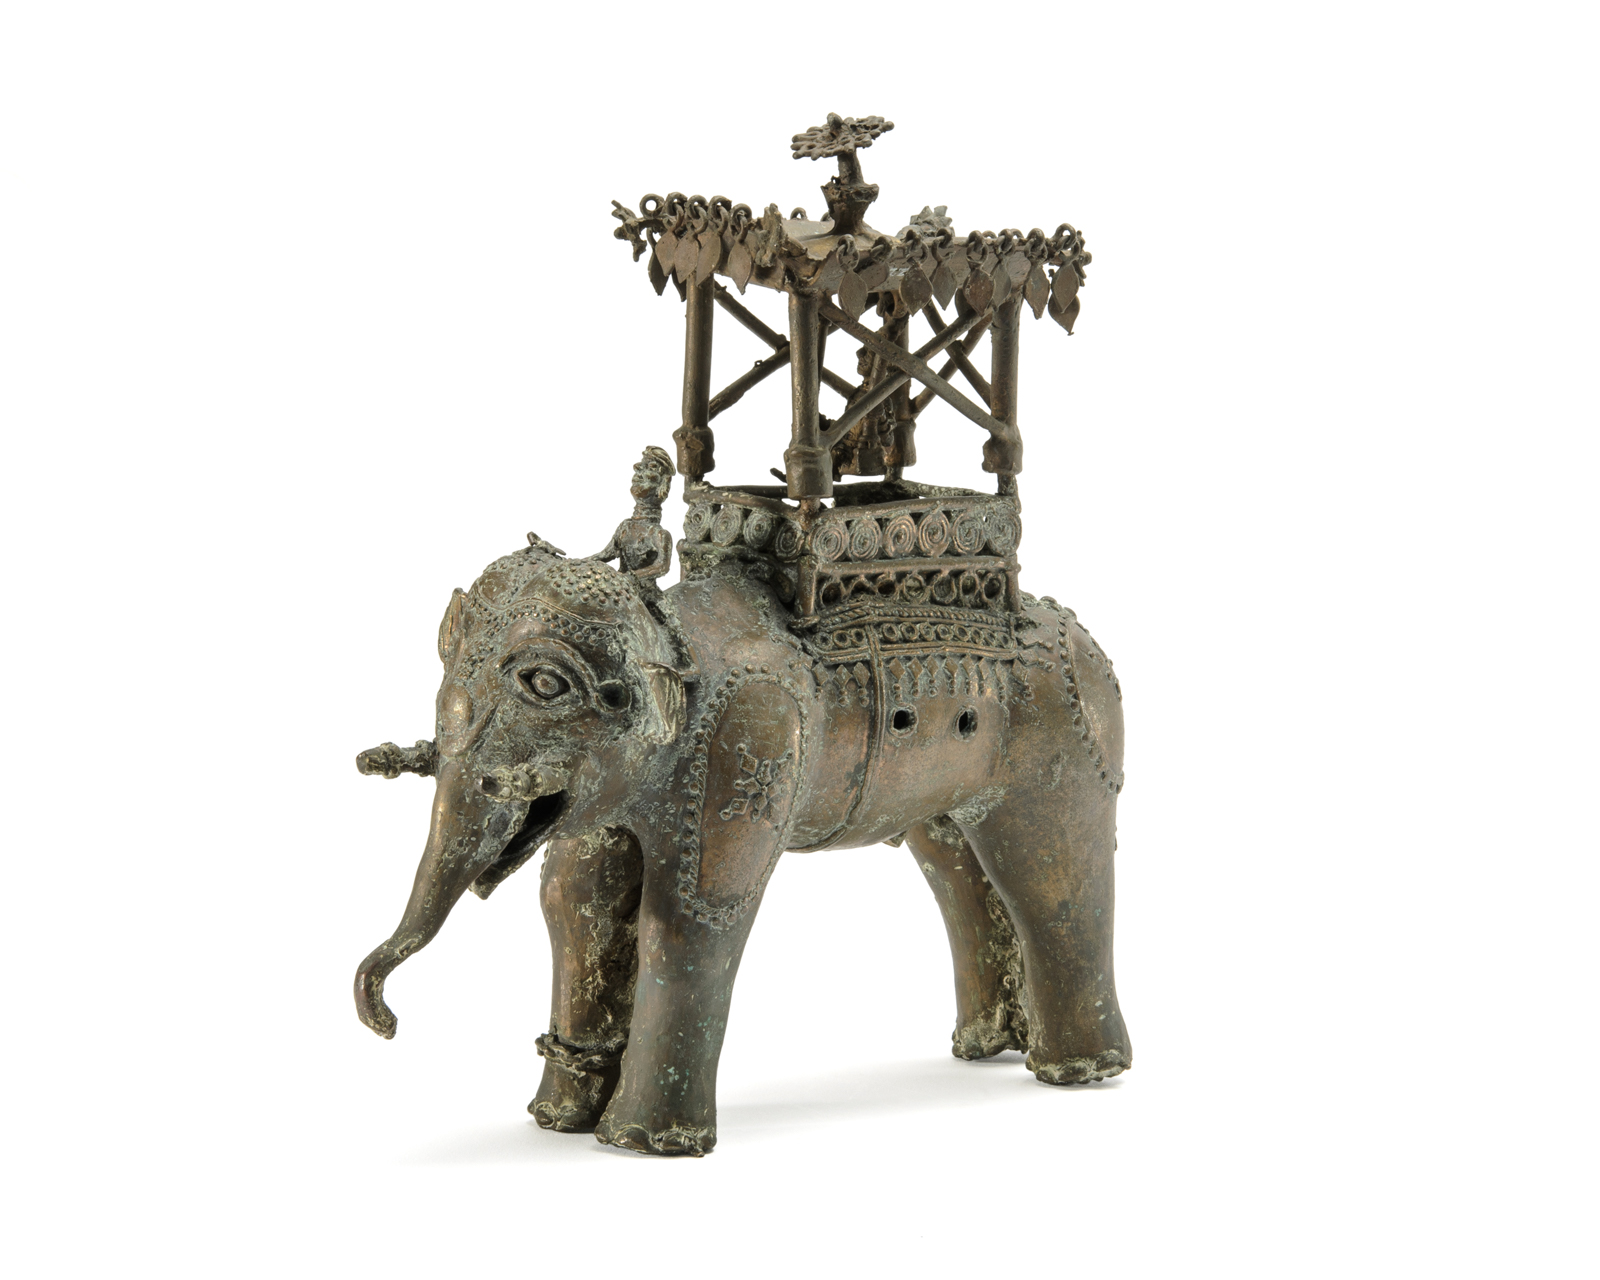 Bell metal statue of an elephant carrying a deity in a howdah on its back